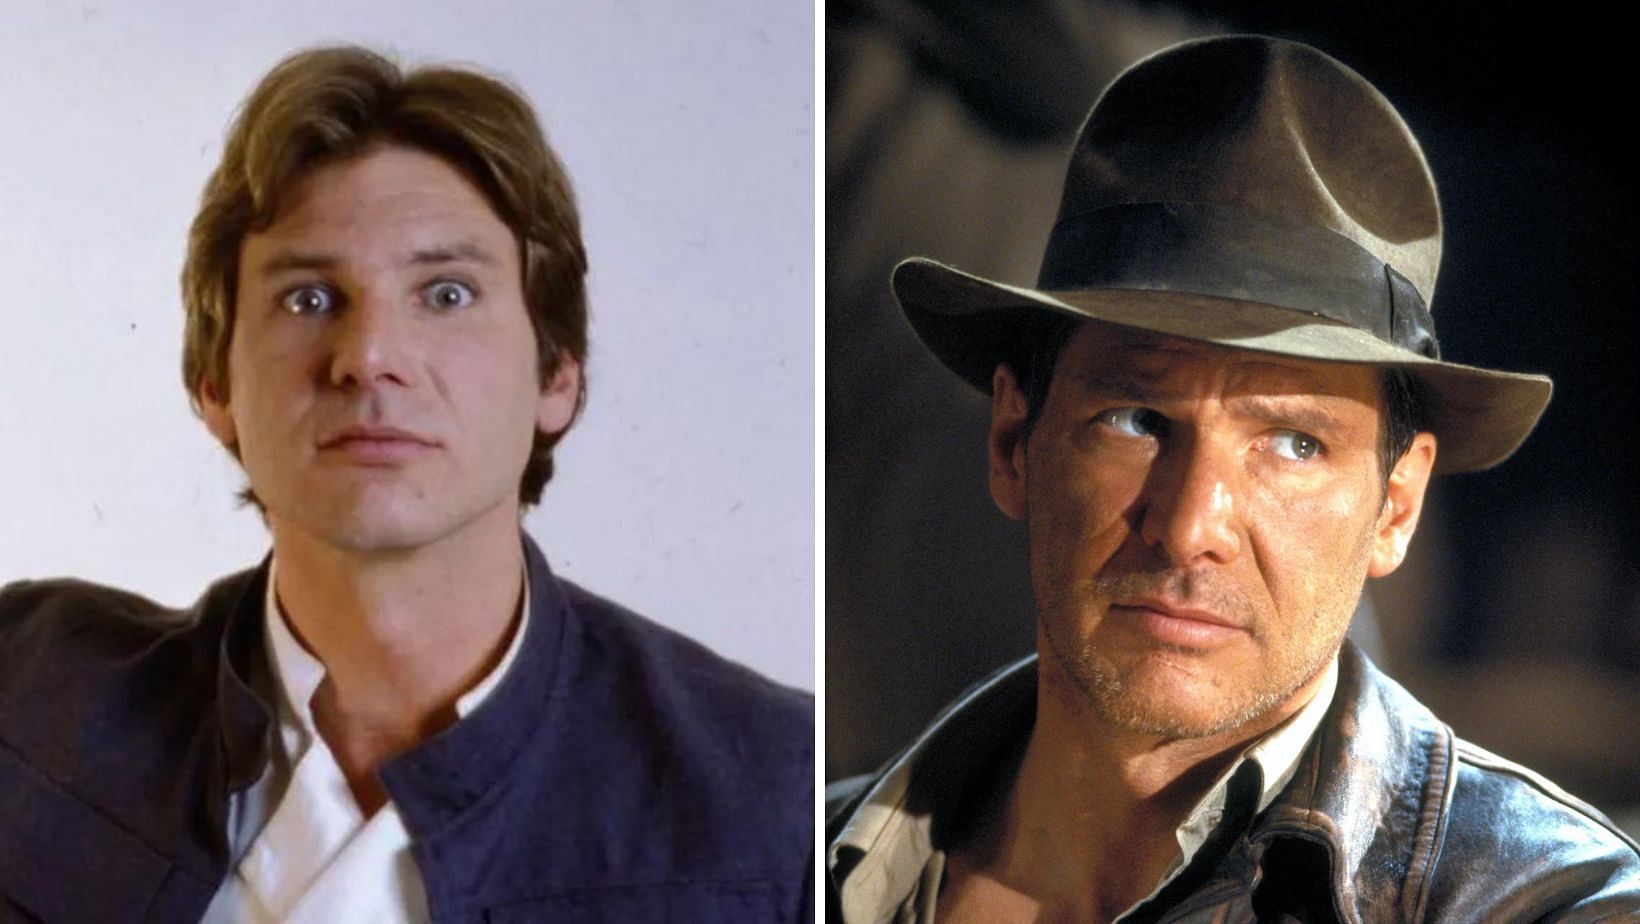 Harrison Ford&#039;s rebels who do not fit into traditional society (Image via Sportskeeda and Lucasfilm)